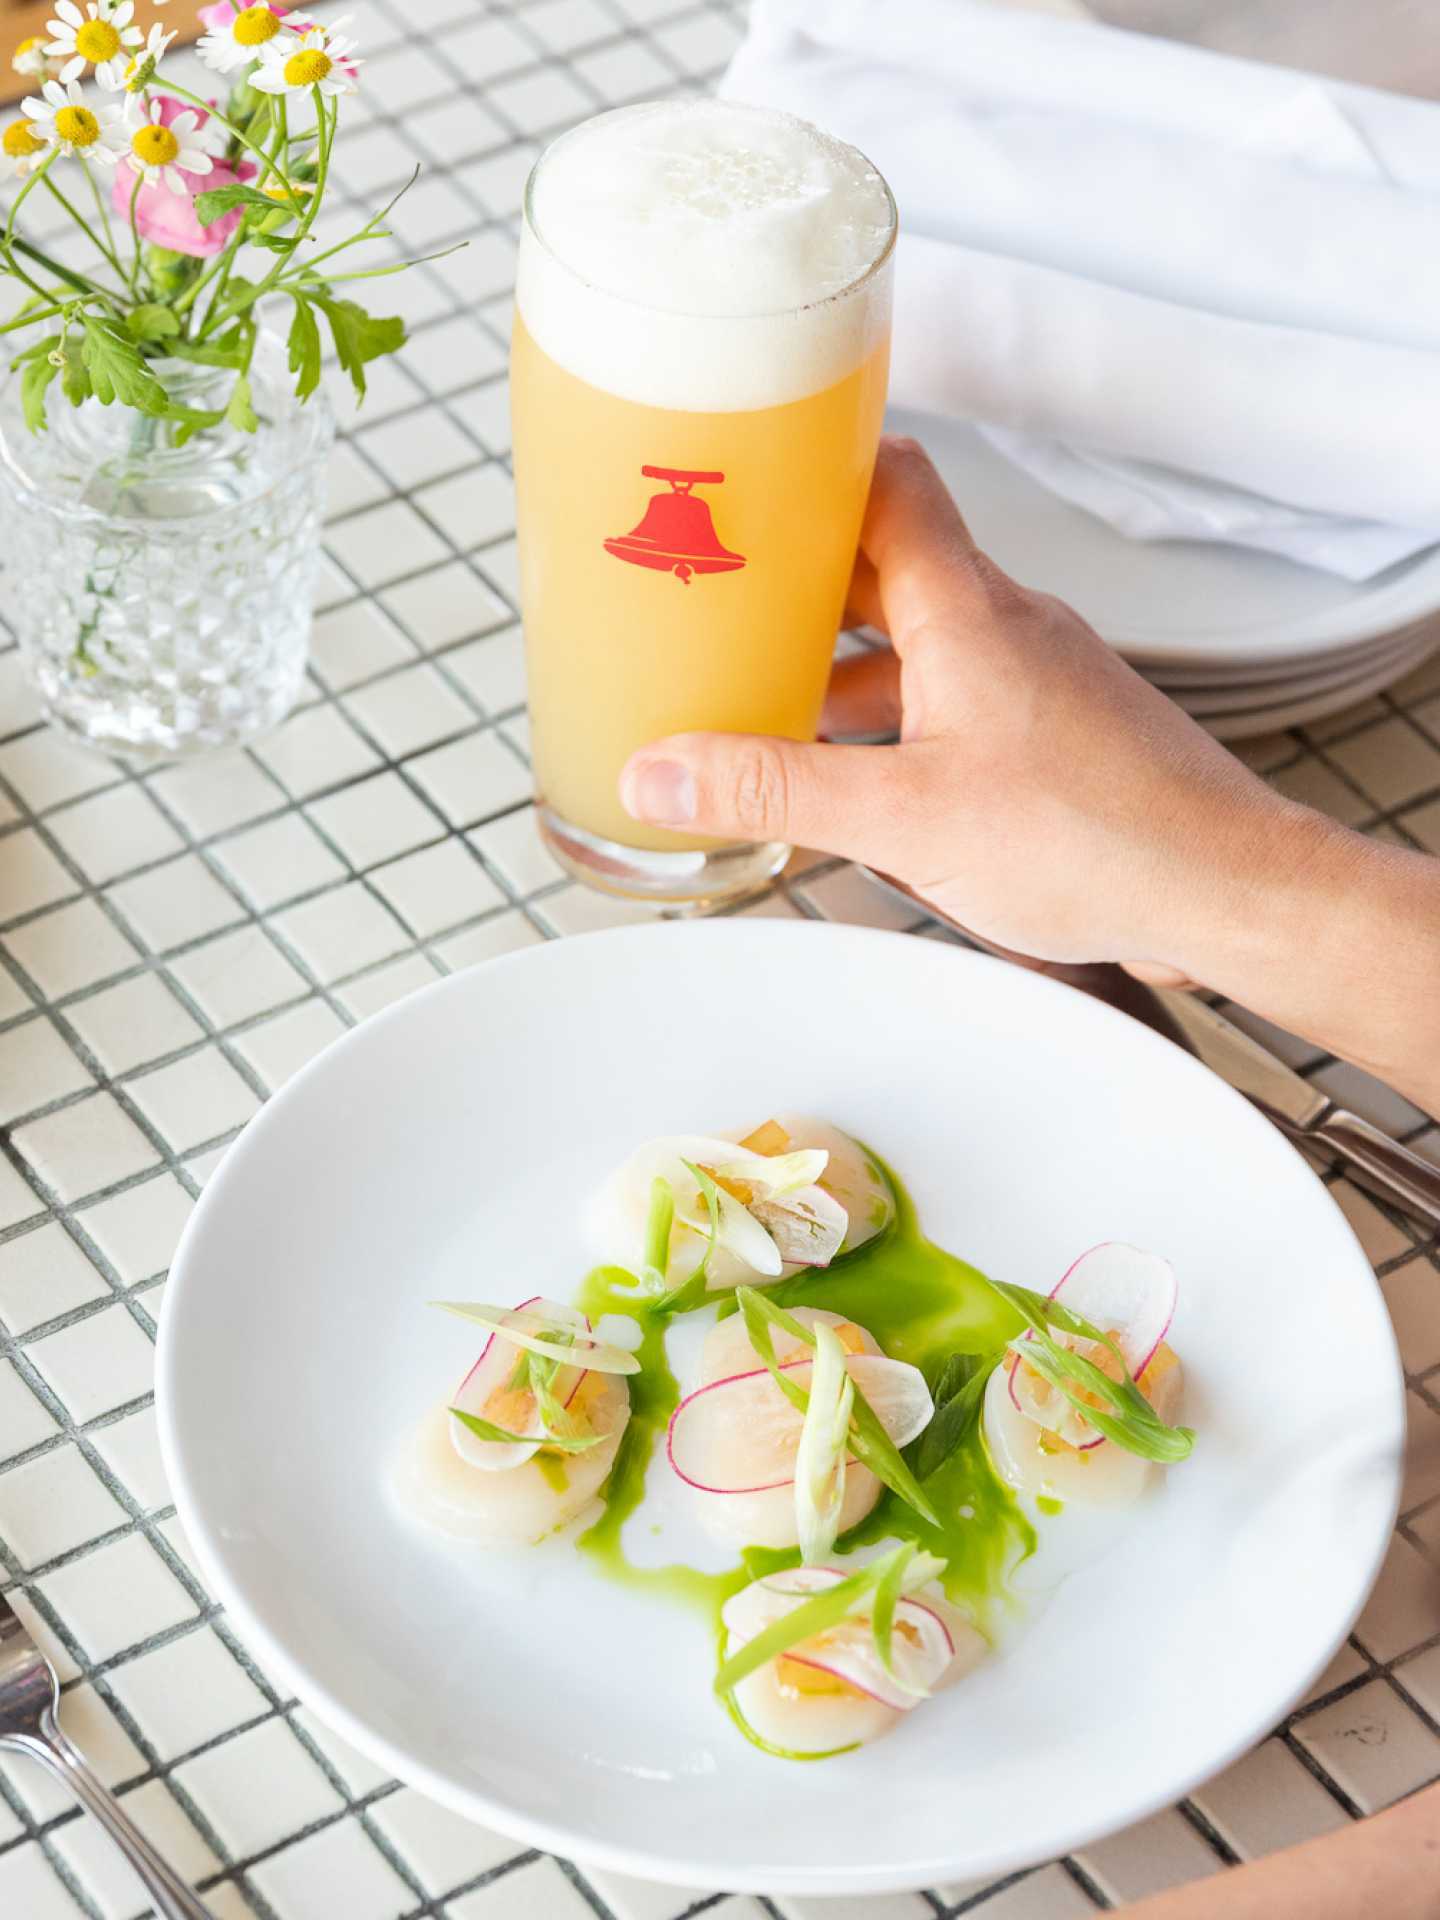 Toronto breweries | Beer and scallops at Bellwoods Brewery